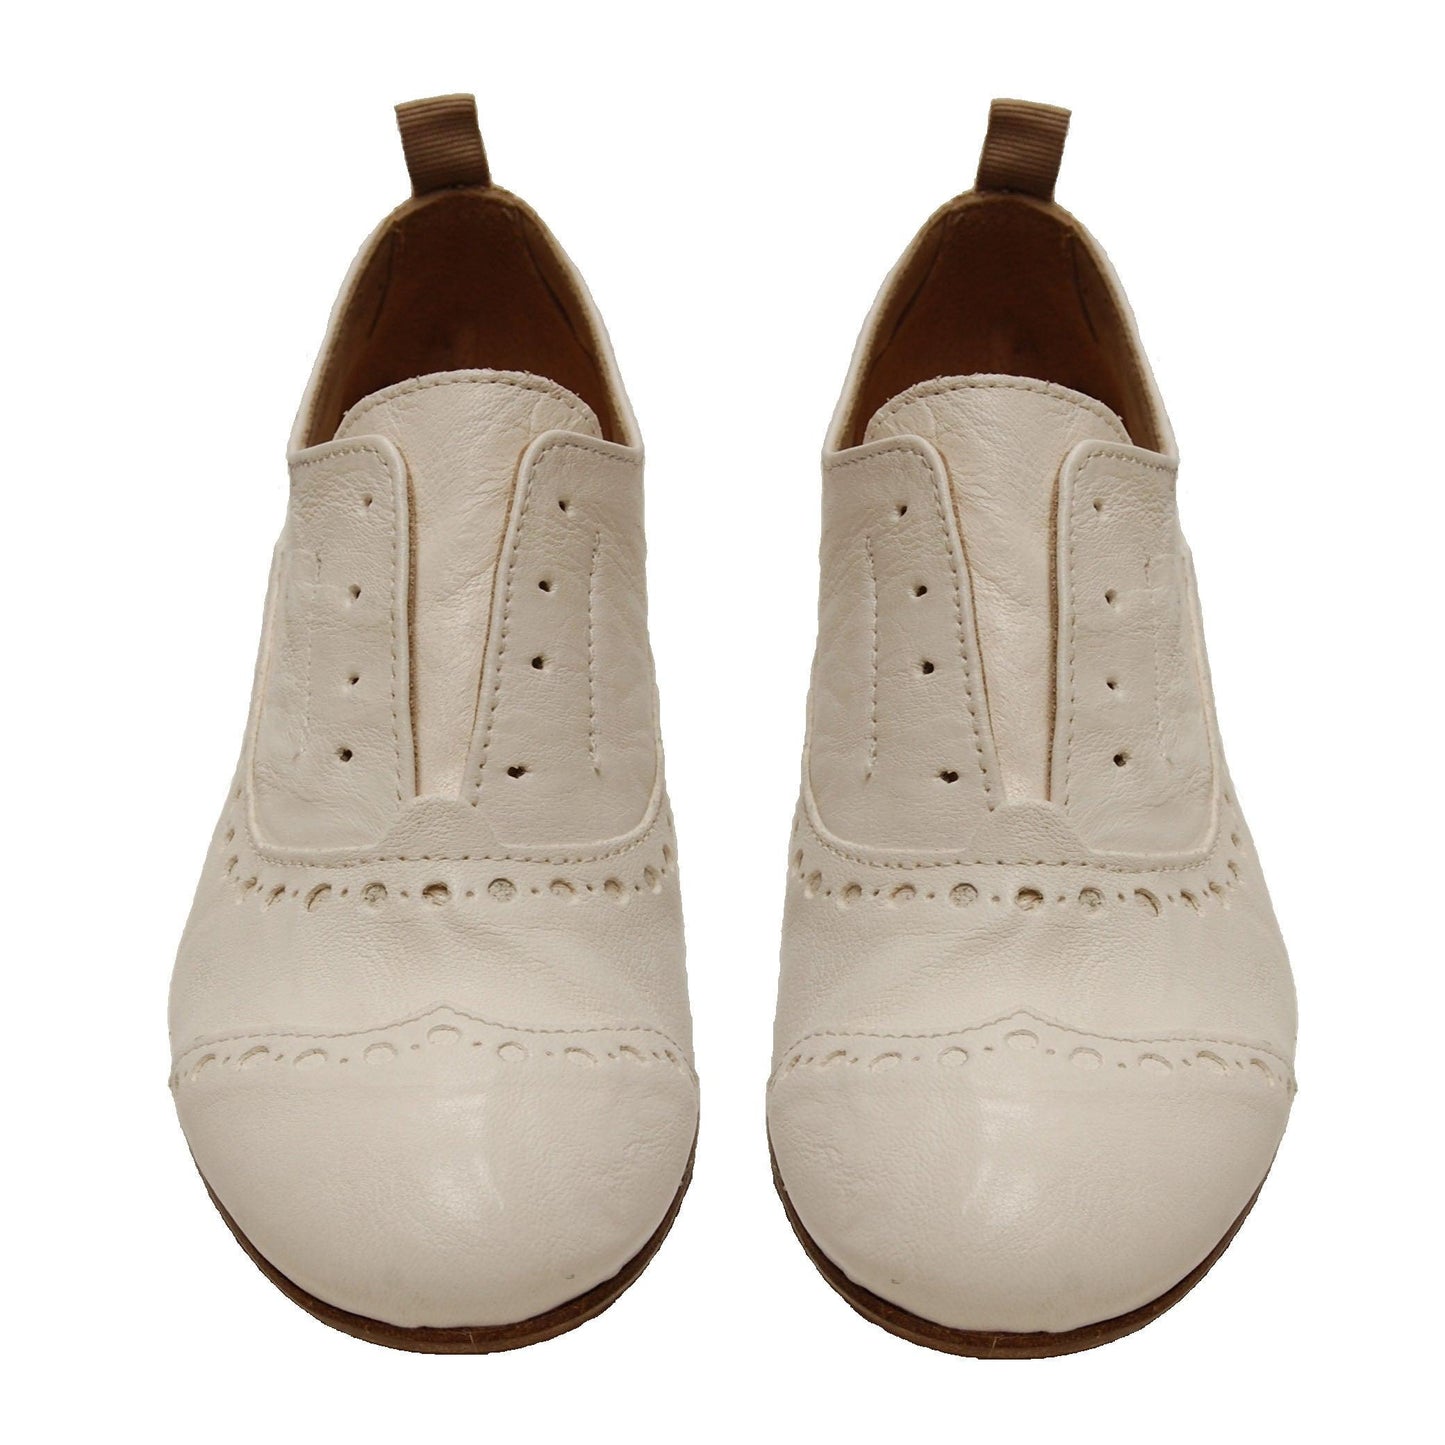 GIUSY 070 - Texas Leather SHOES OPTIC WHITE - History541